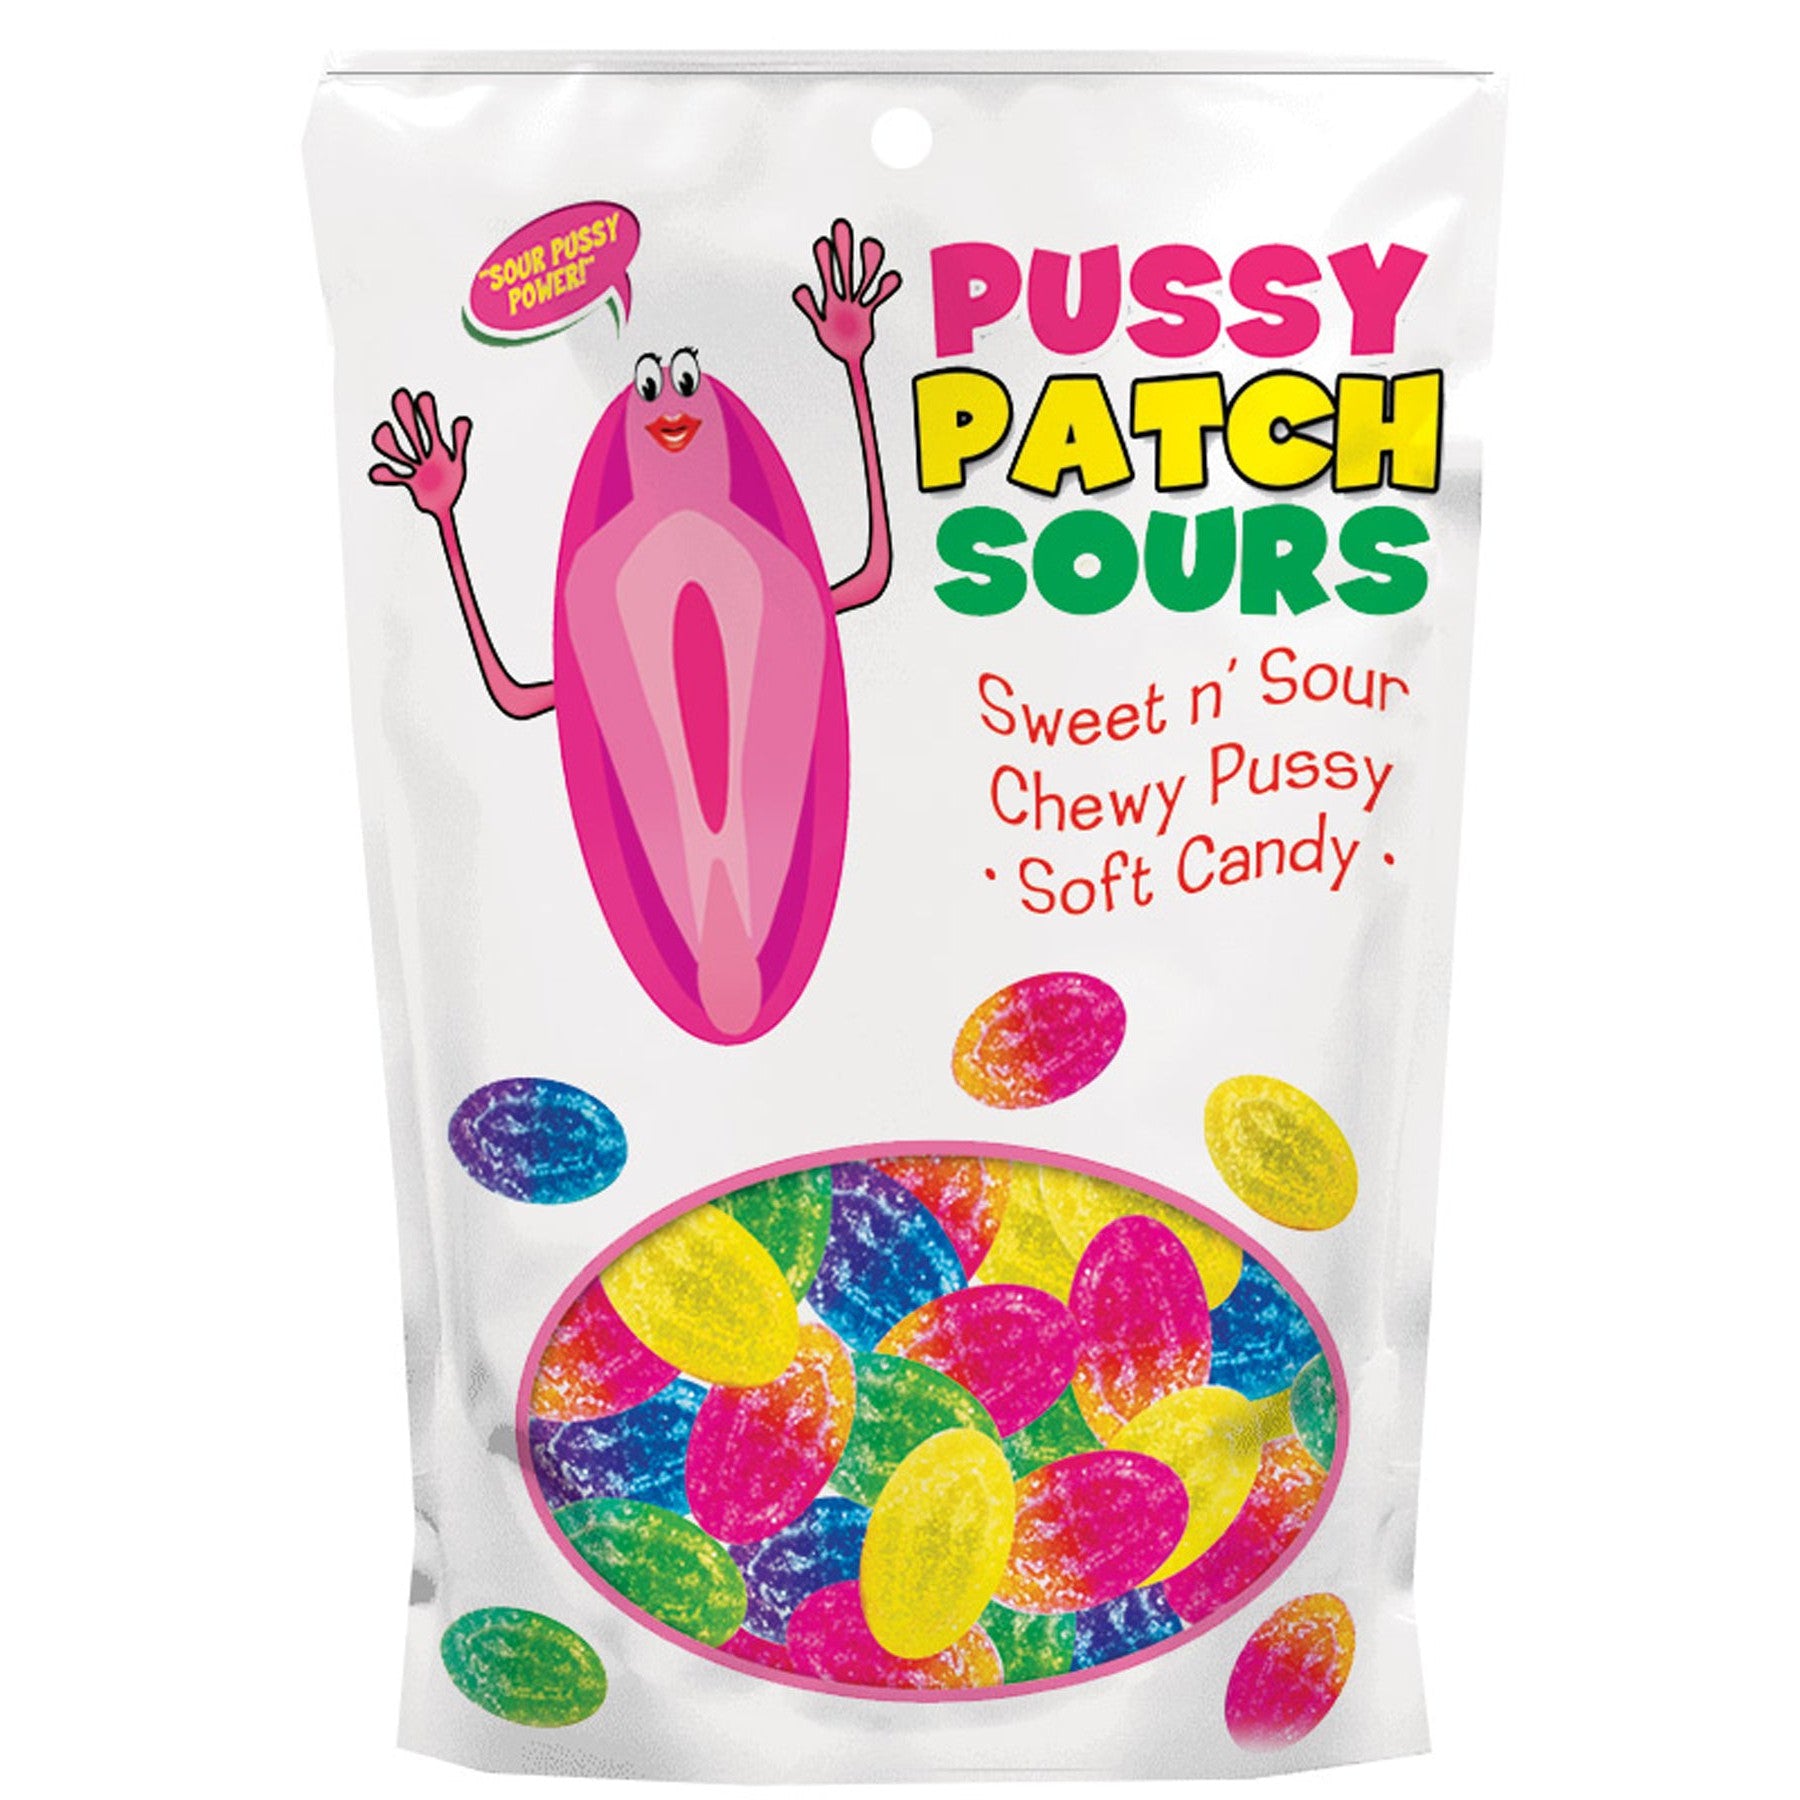 Pussy Patch Sours - Each